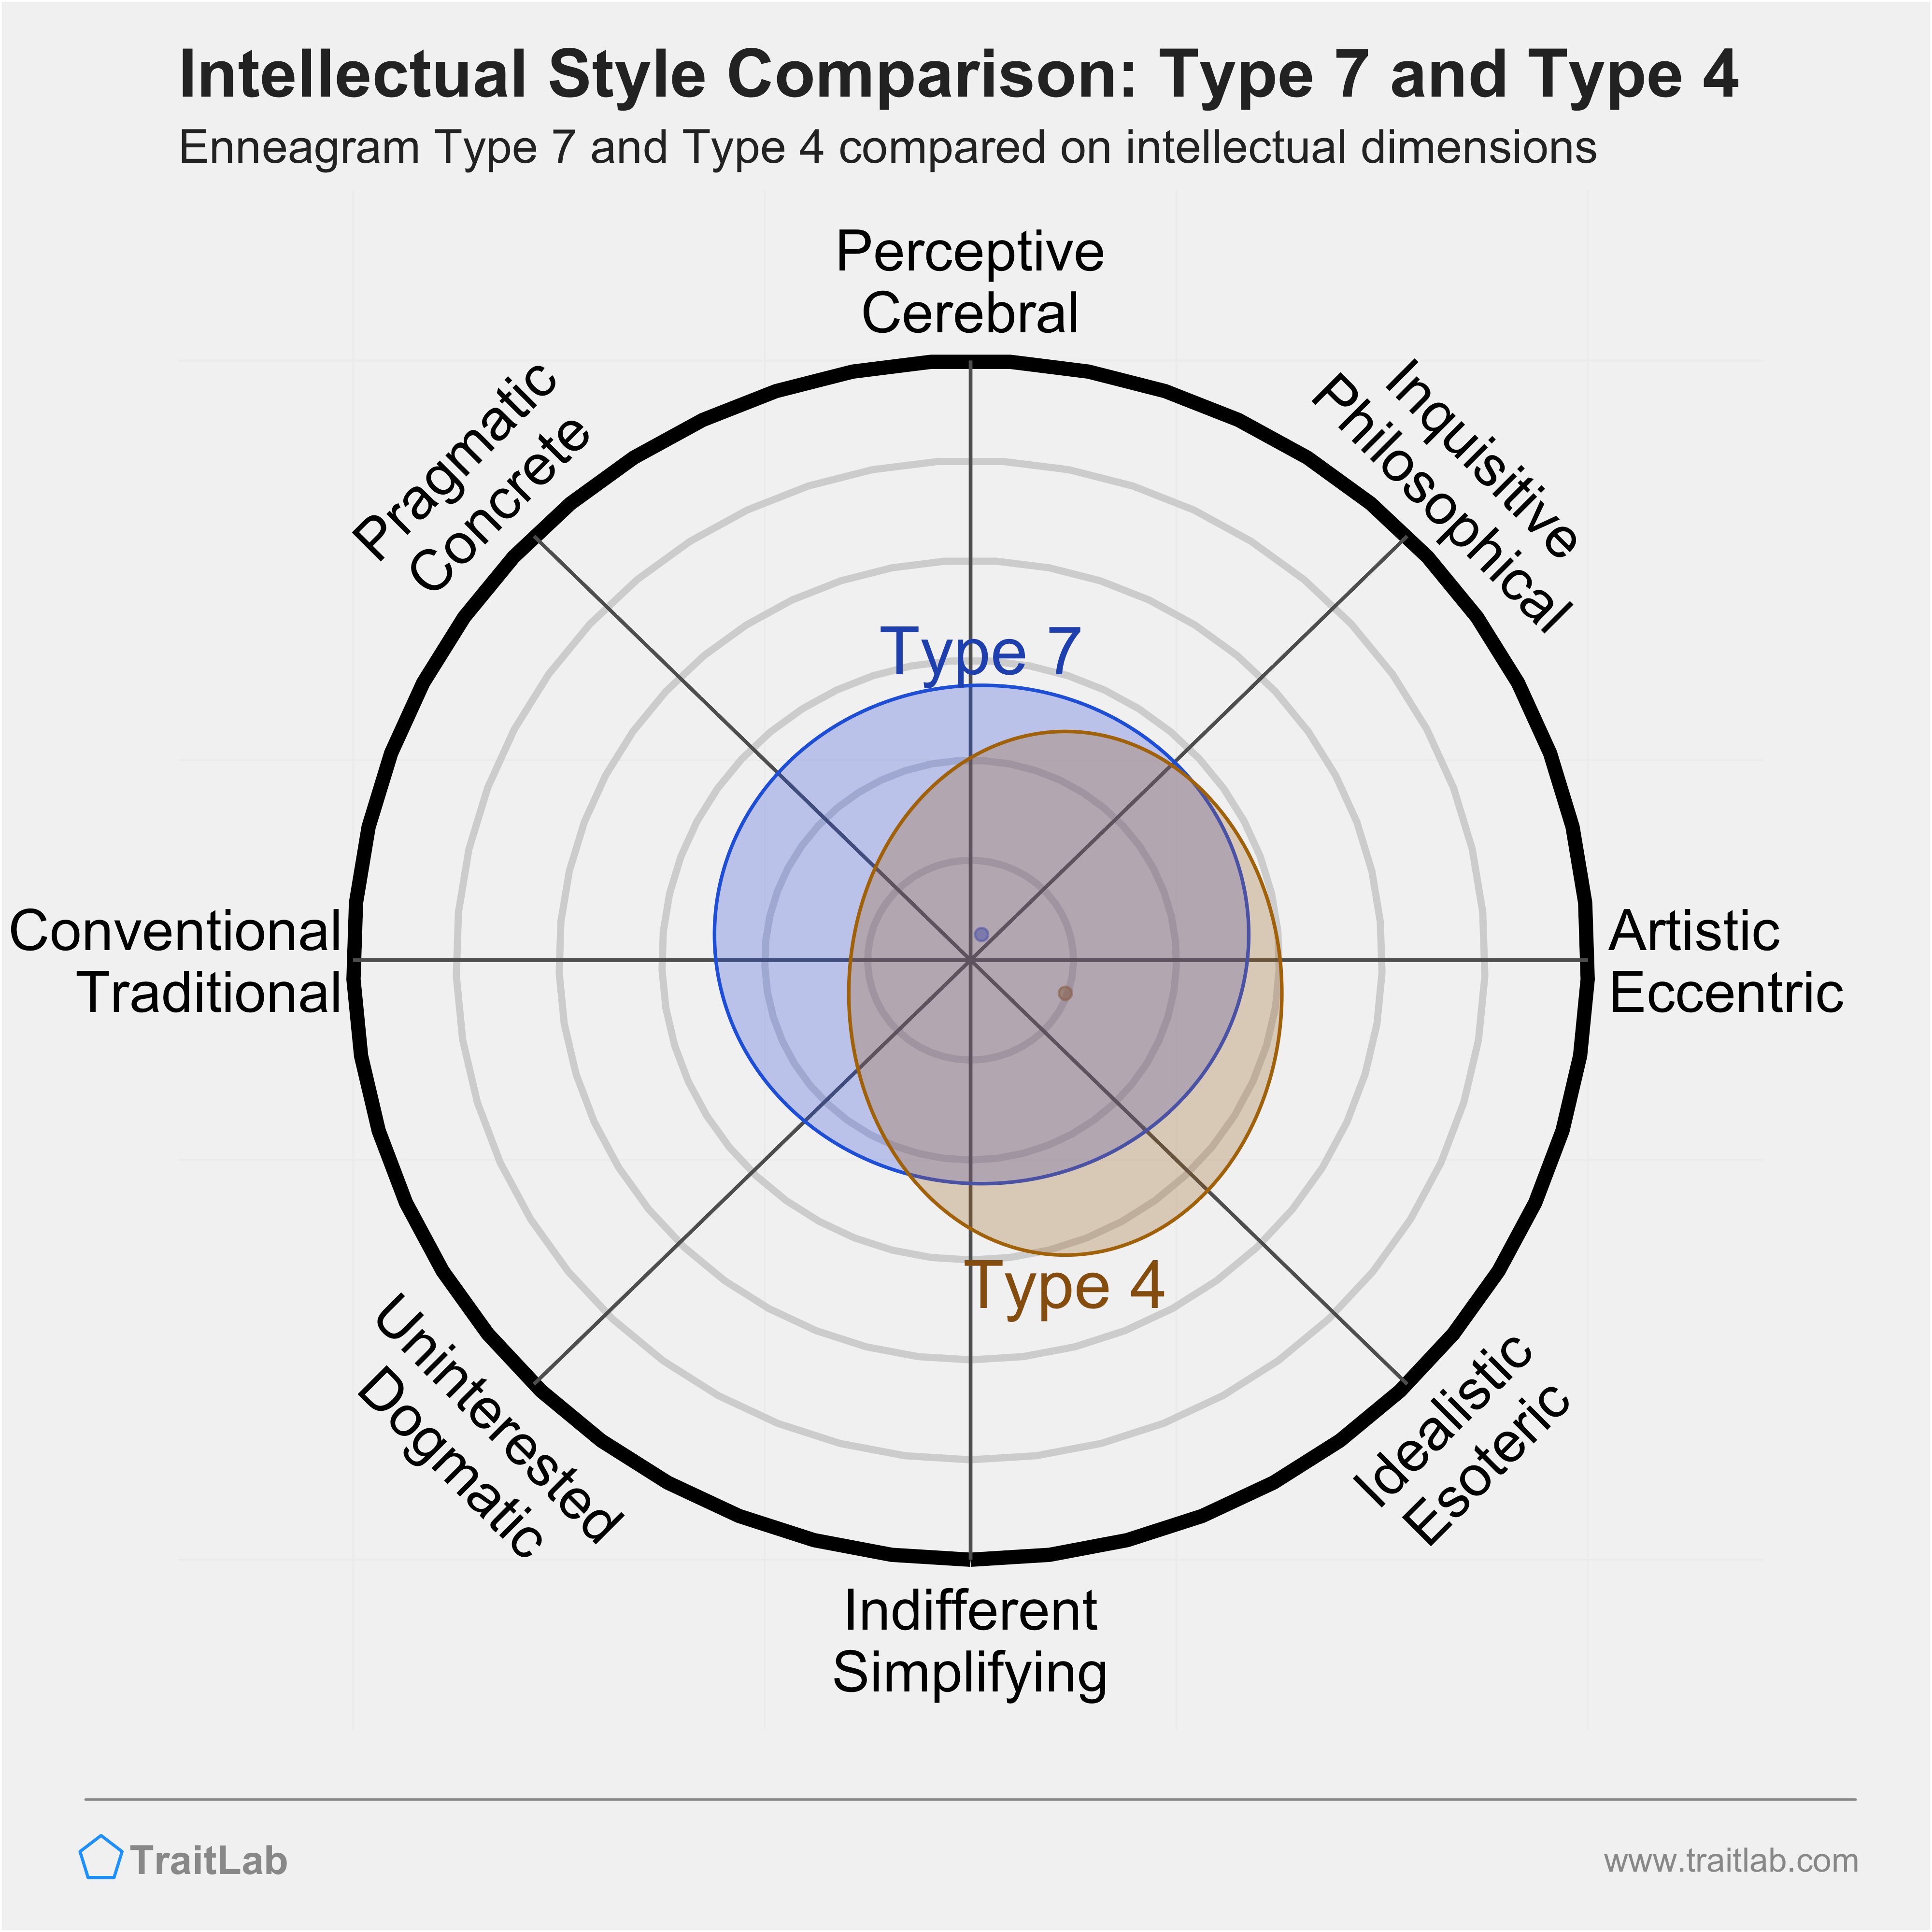 Type 7 and Type 4 comparison across intellectual dimensions